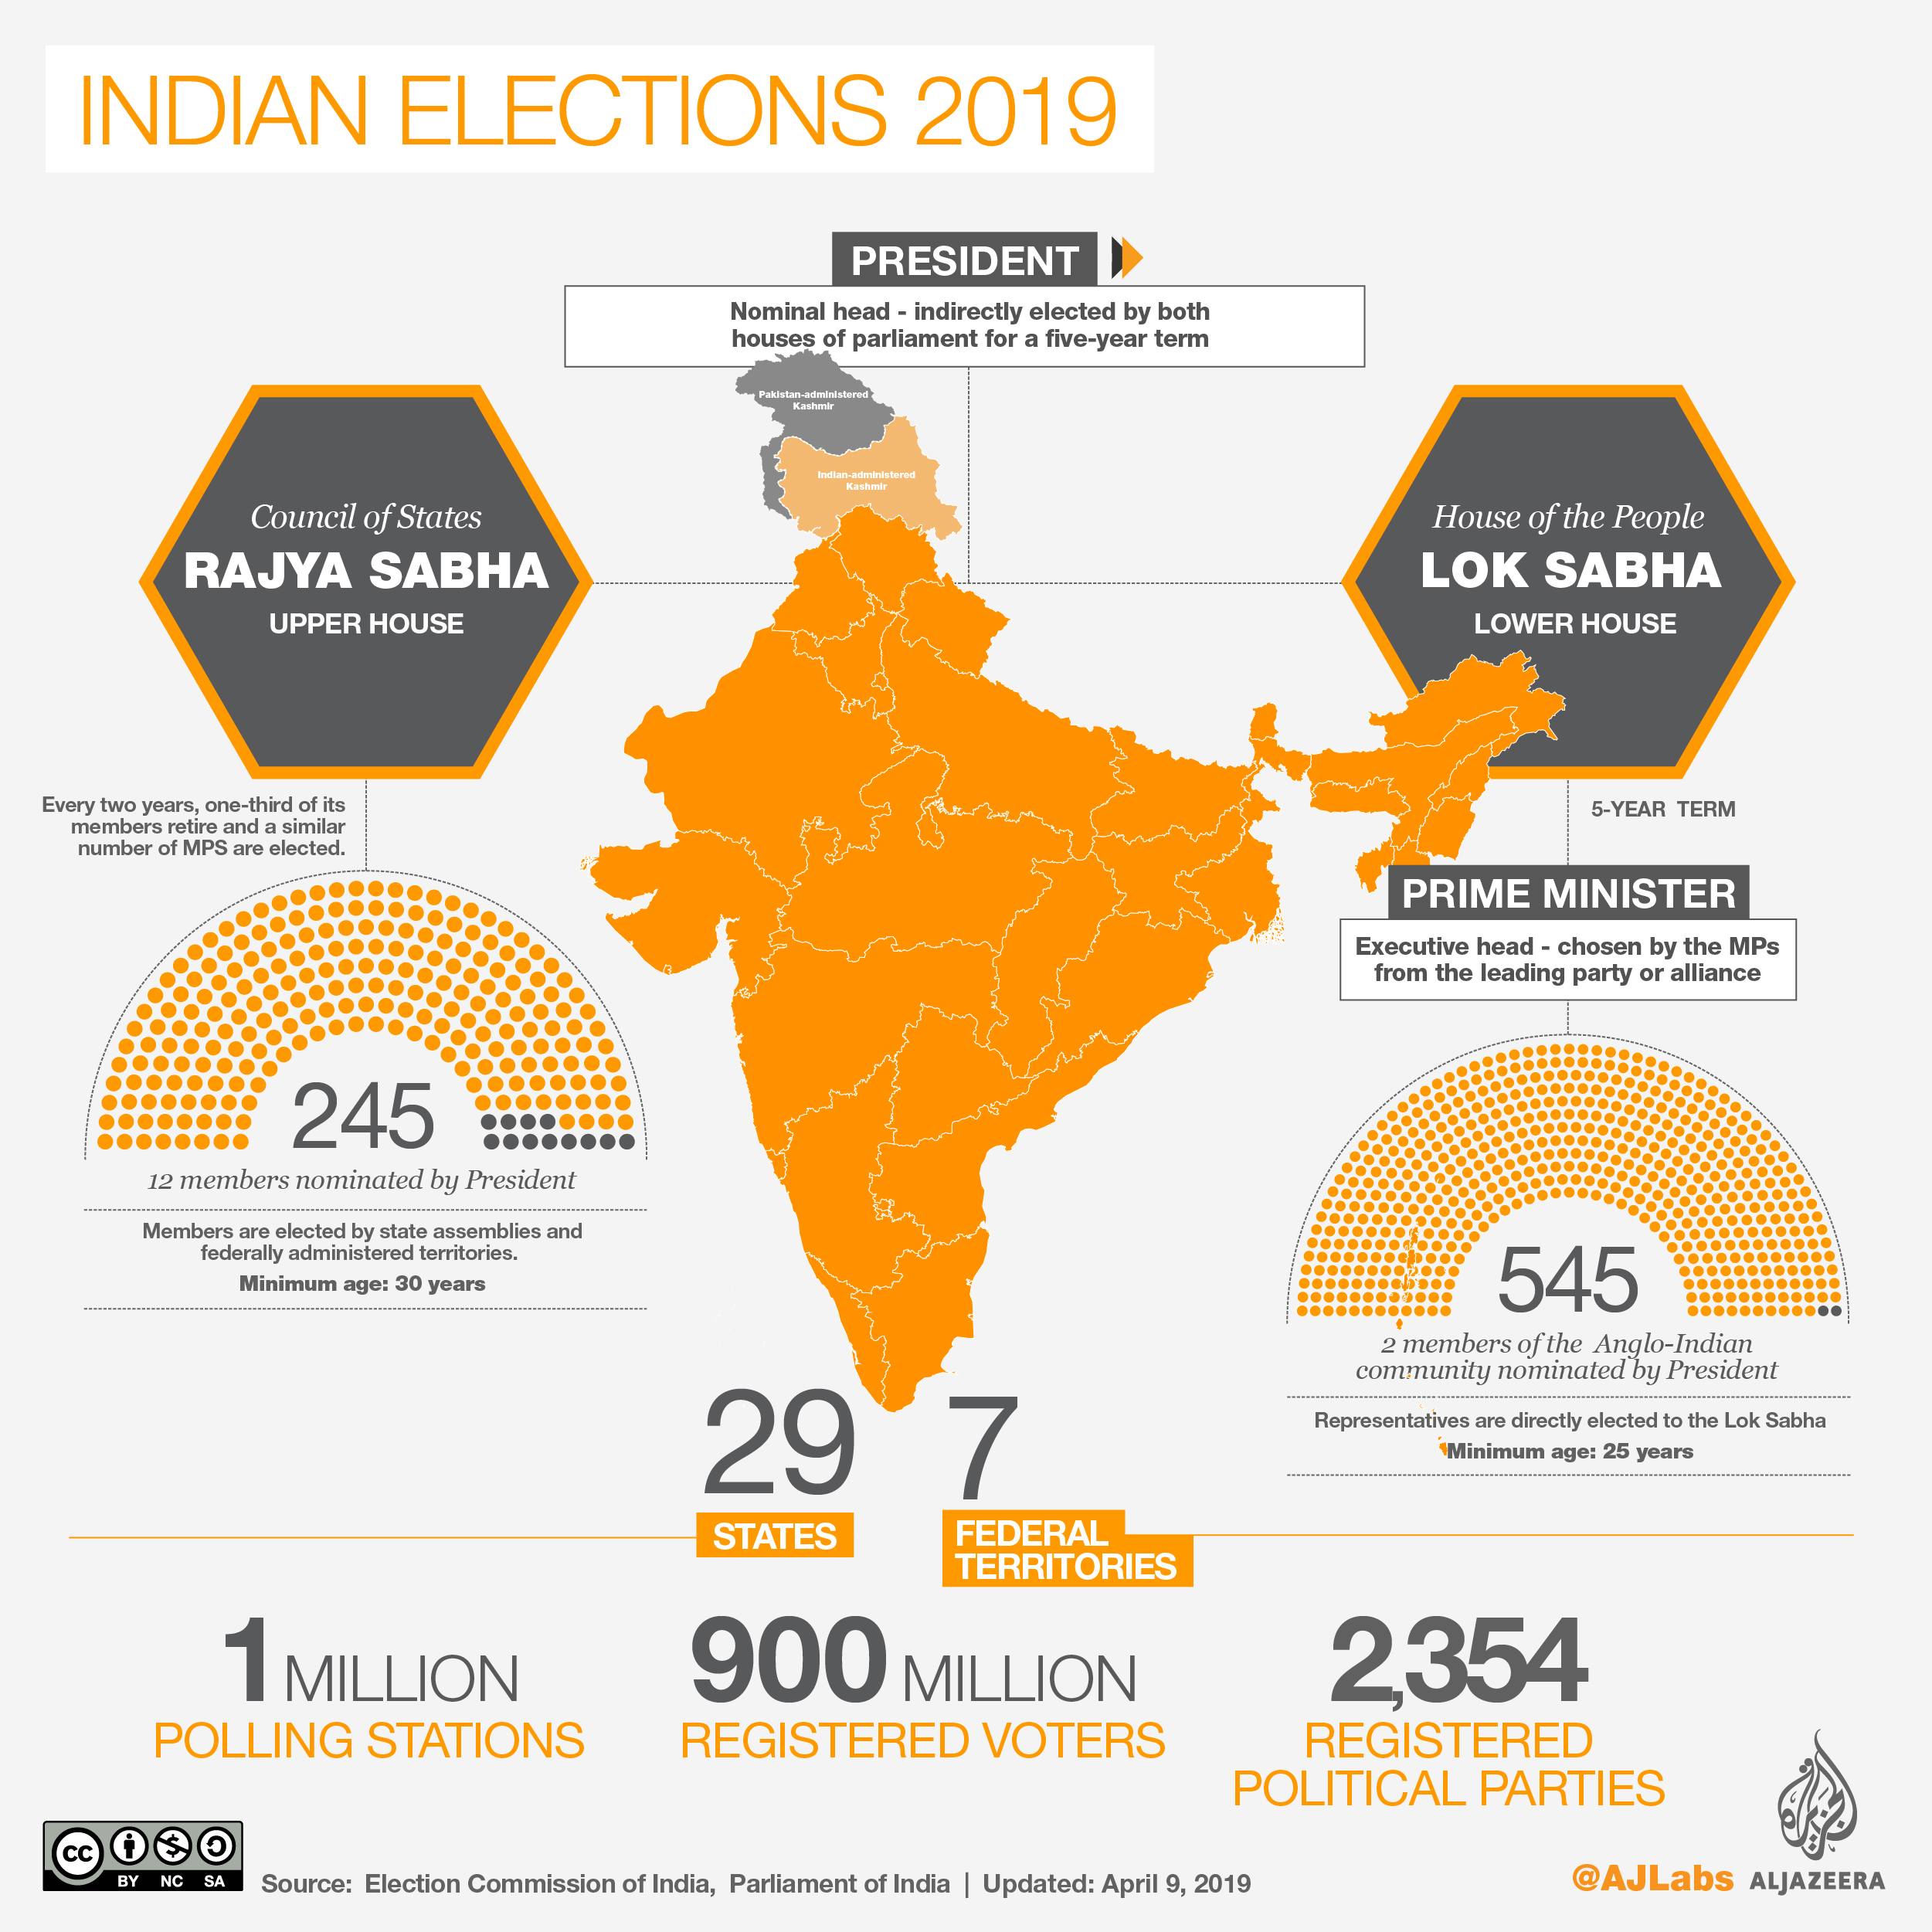 INTERACTIVE: Indian elections 2019 - Government April 29